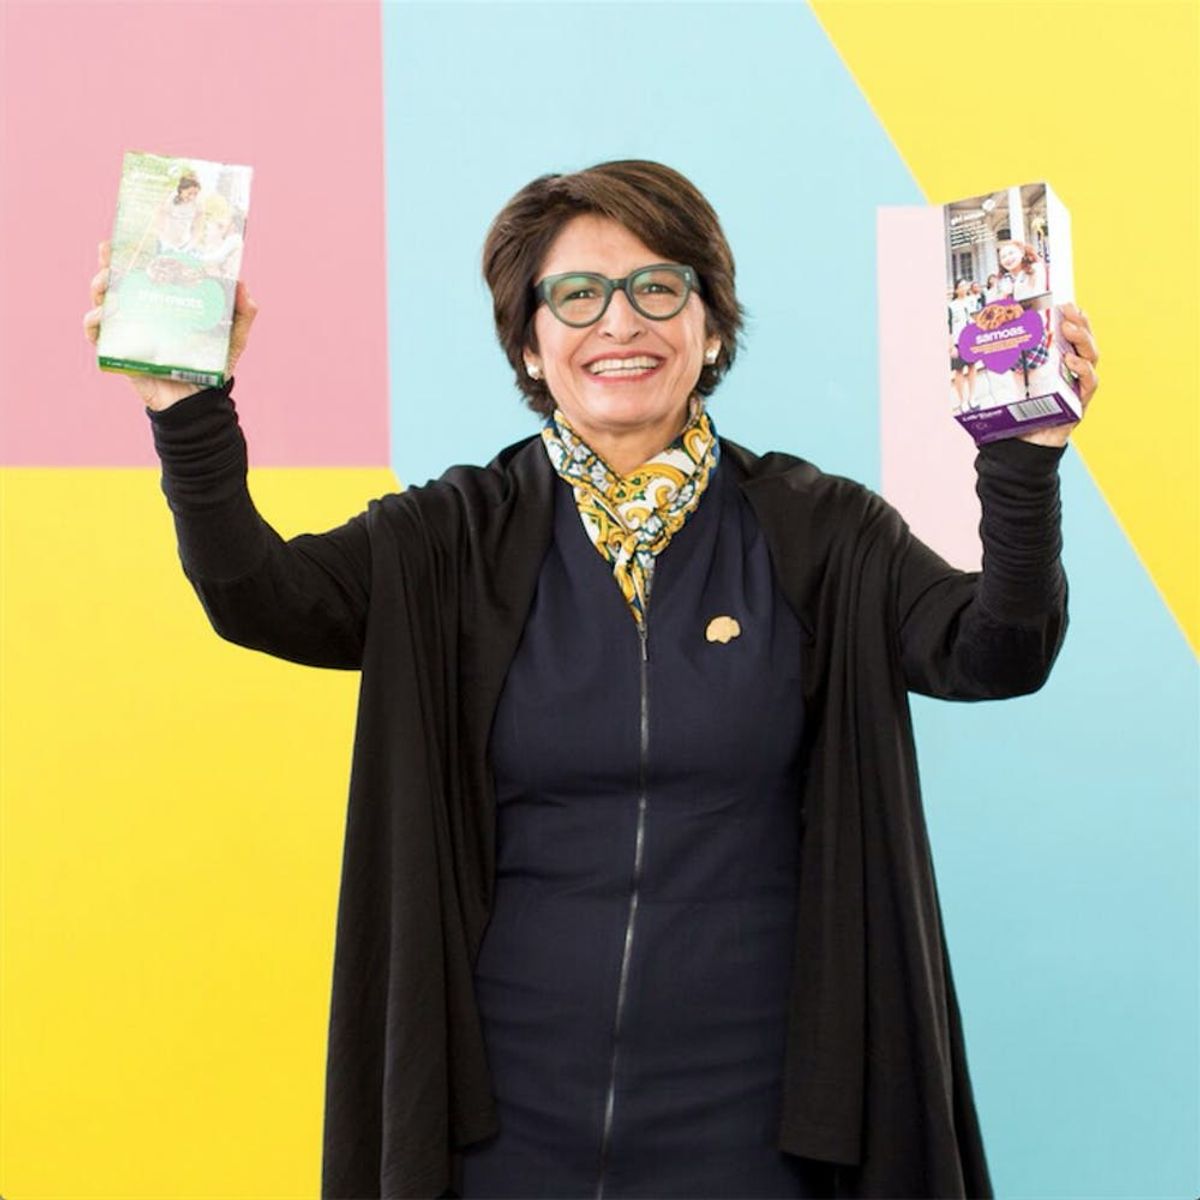 Why Girl Scouts CEO Sylvia Acevedo at Re:Make 2016 Wants to Thank You for Being Creative